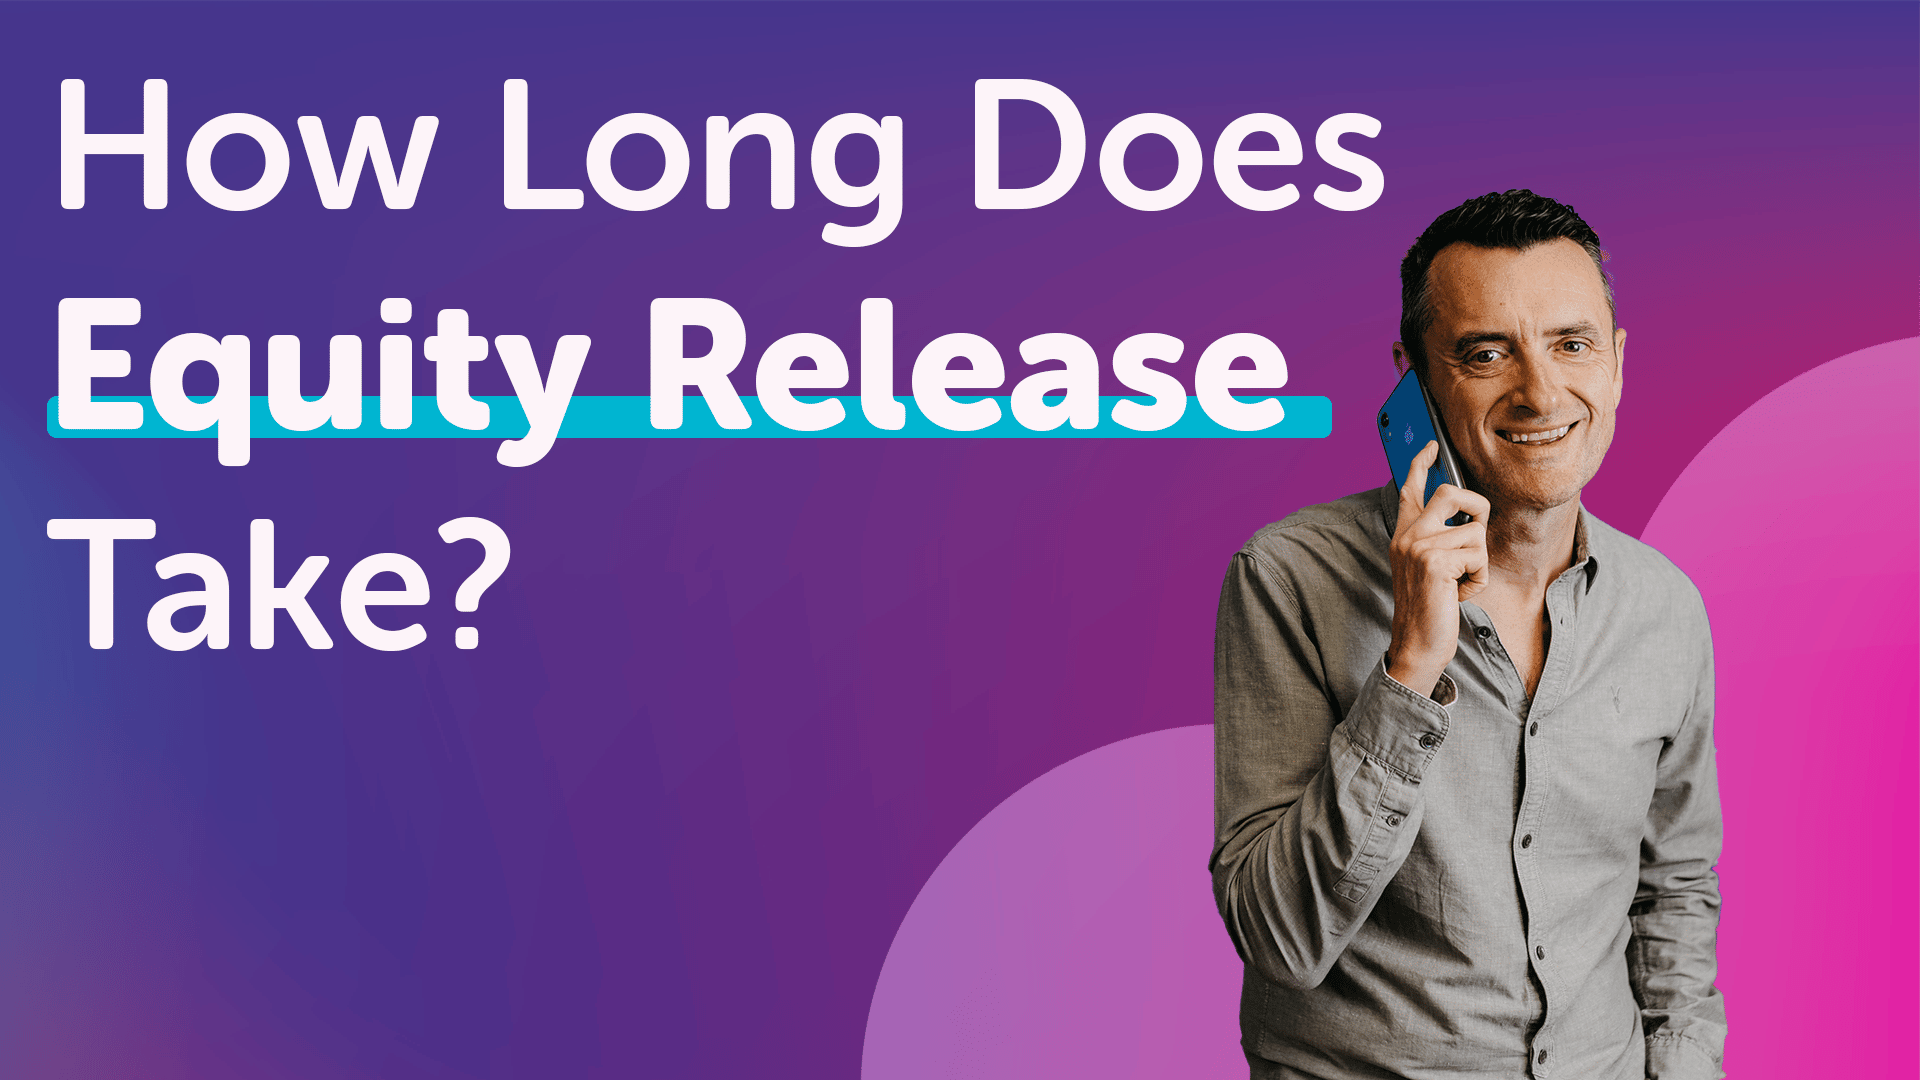 How long does equity release take